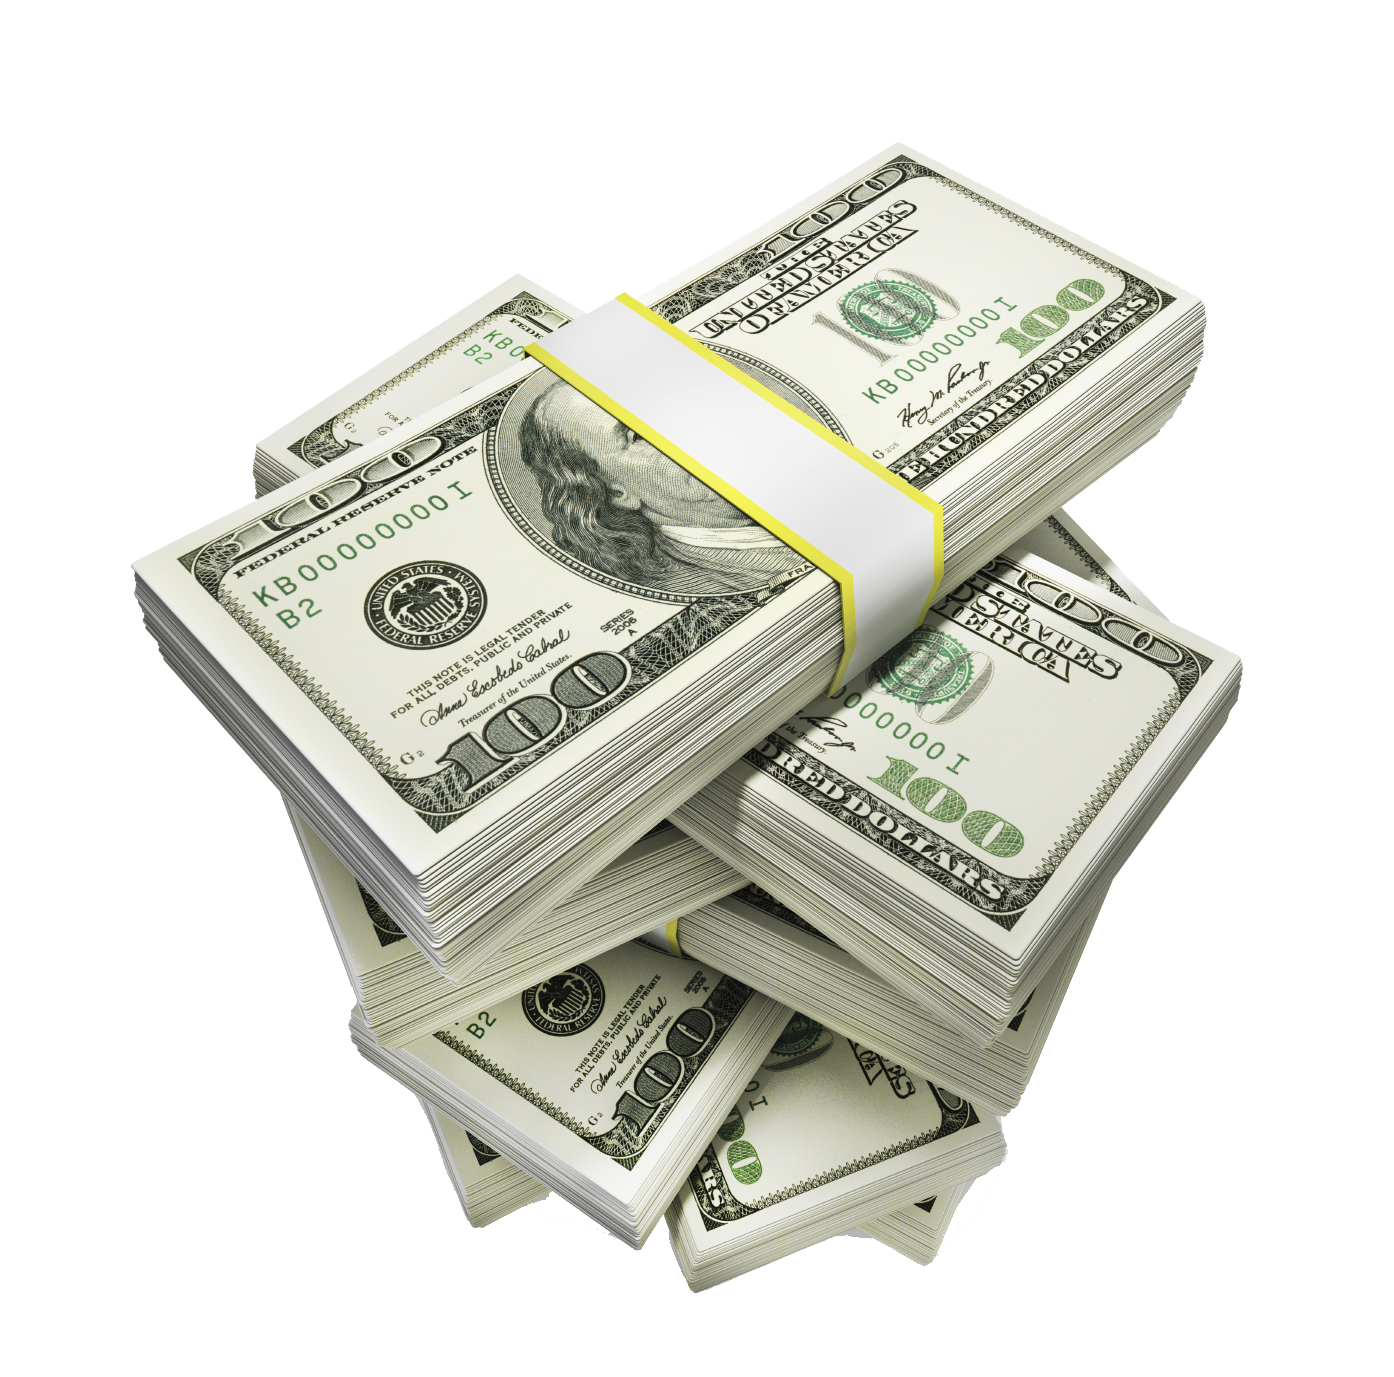 Contest Money Photography Royalty-Free Will Stacks Stock PNG Image